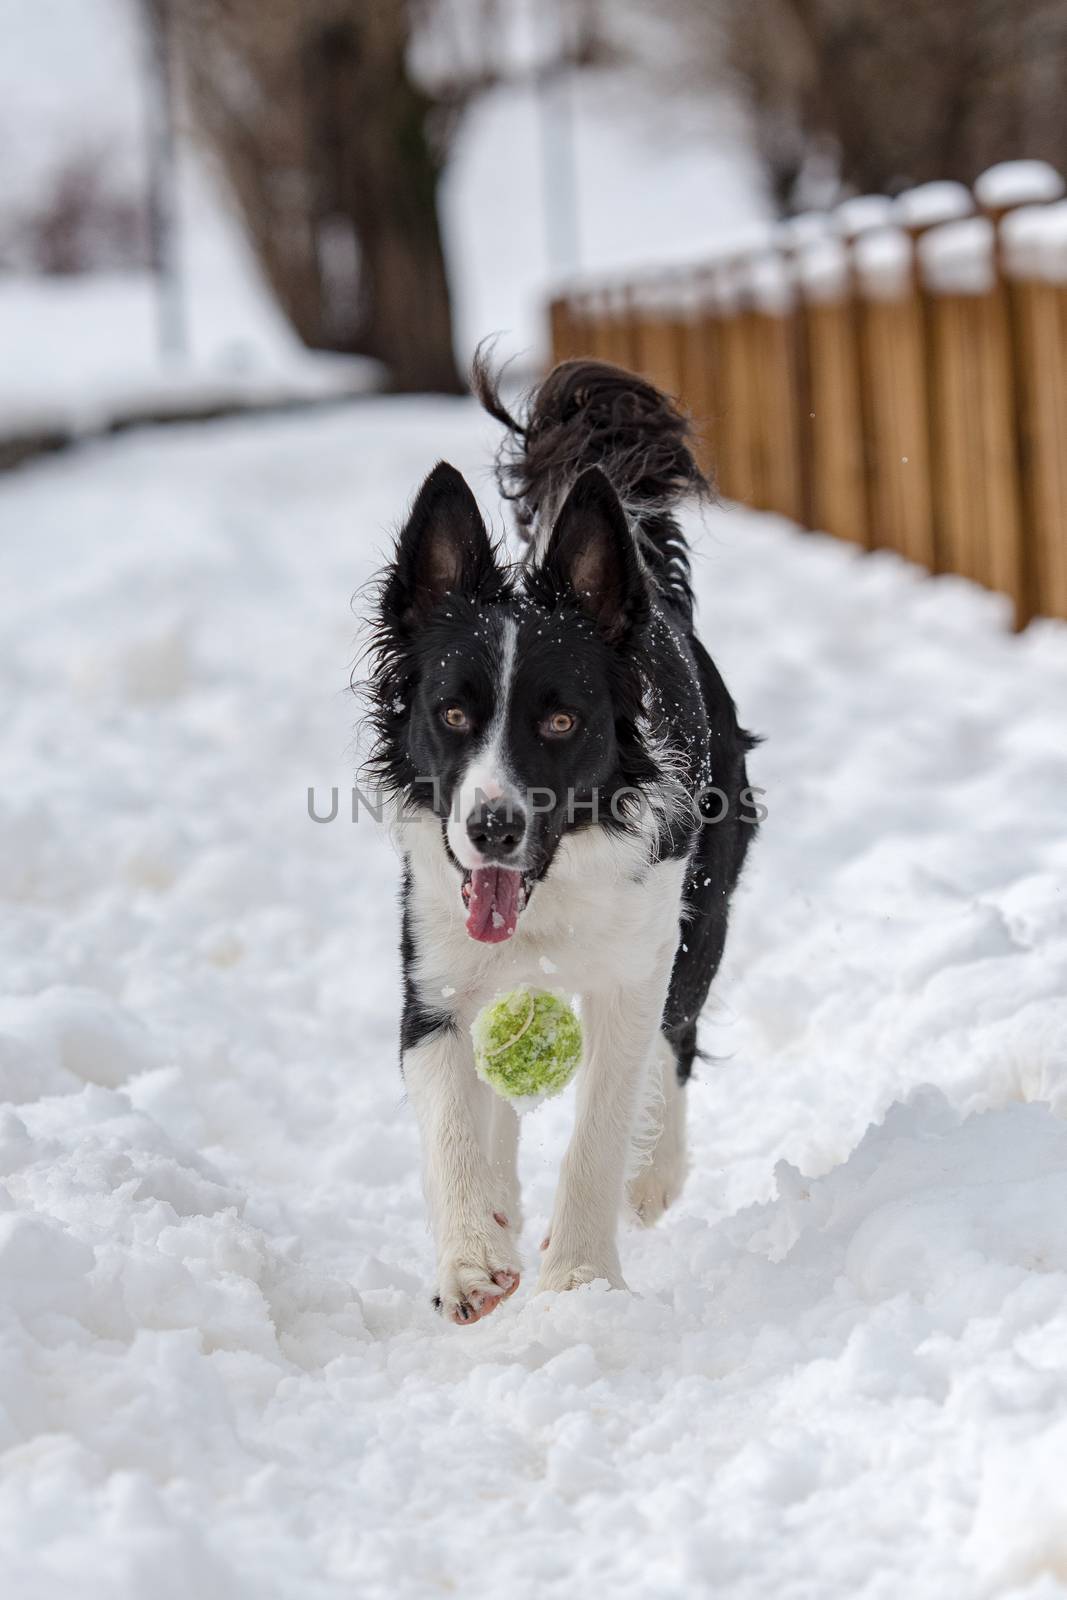 Adorable Cute Black And White Border Collie Portrait With White Snow Backgroun by martinscphoto